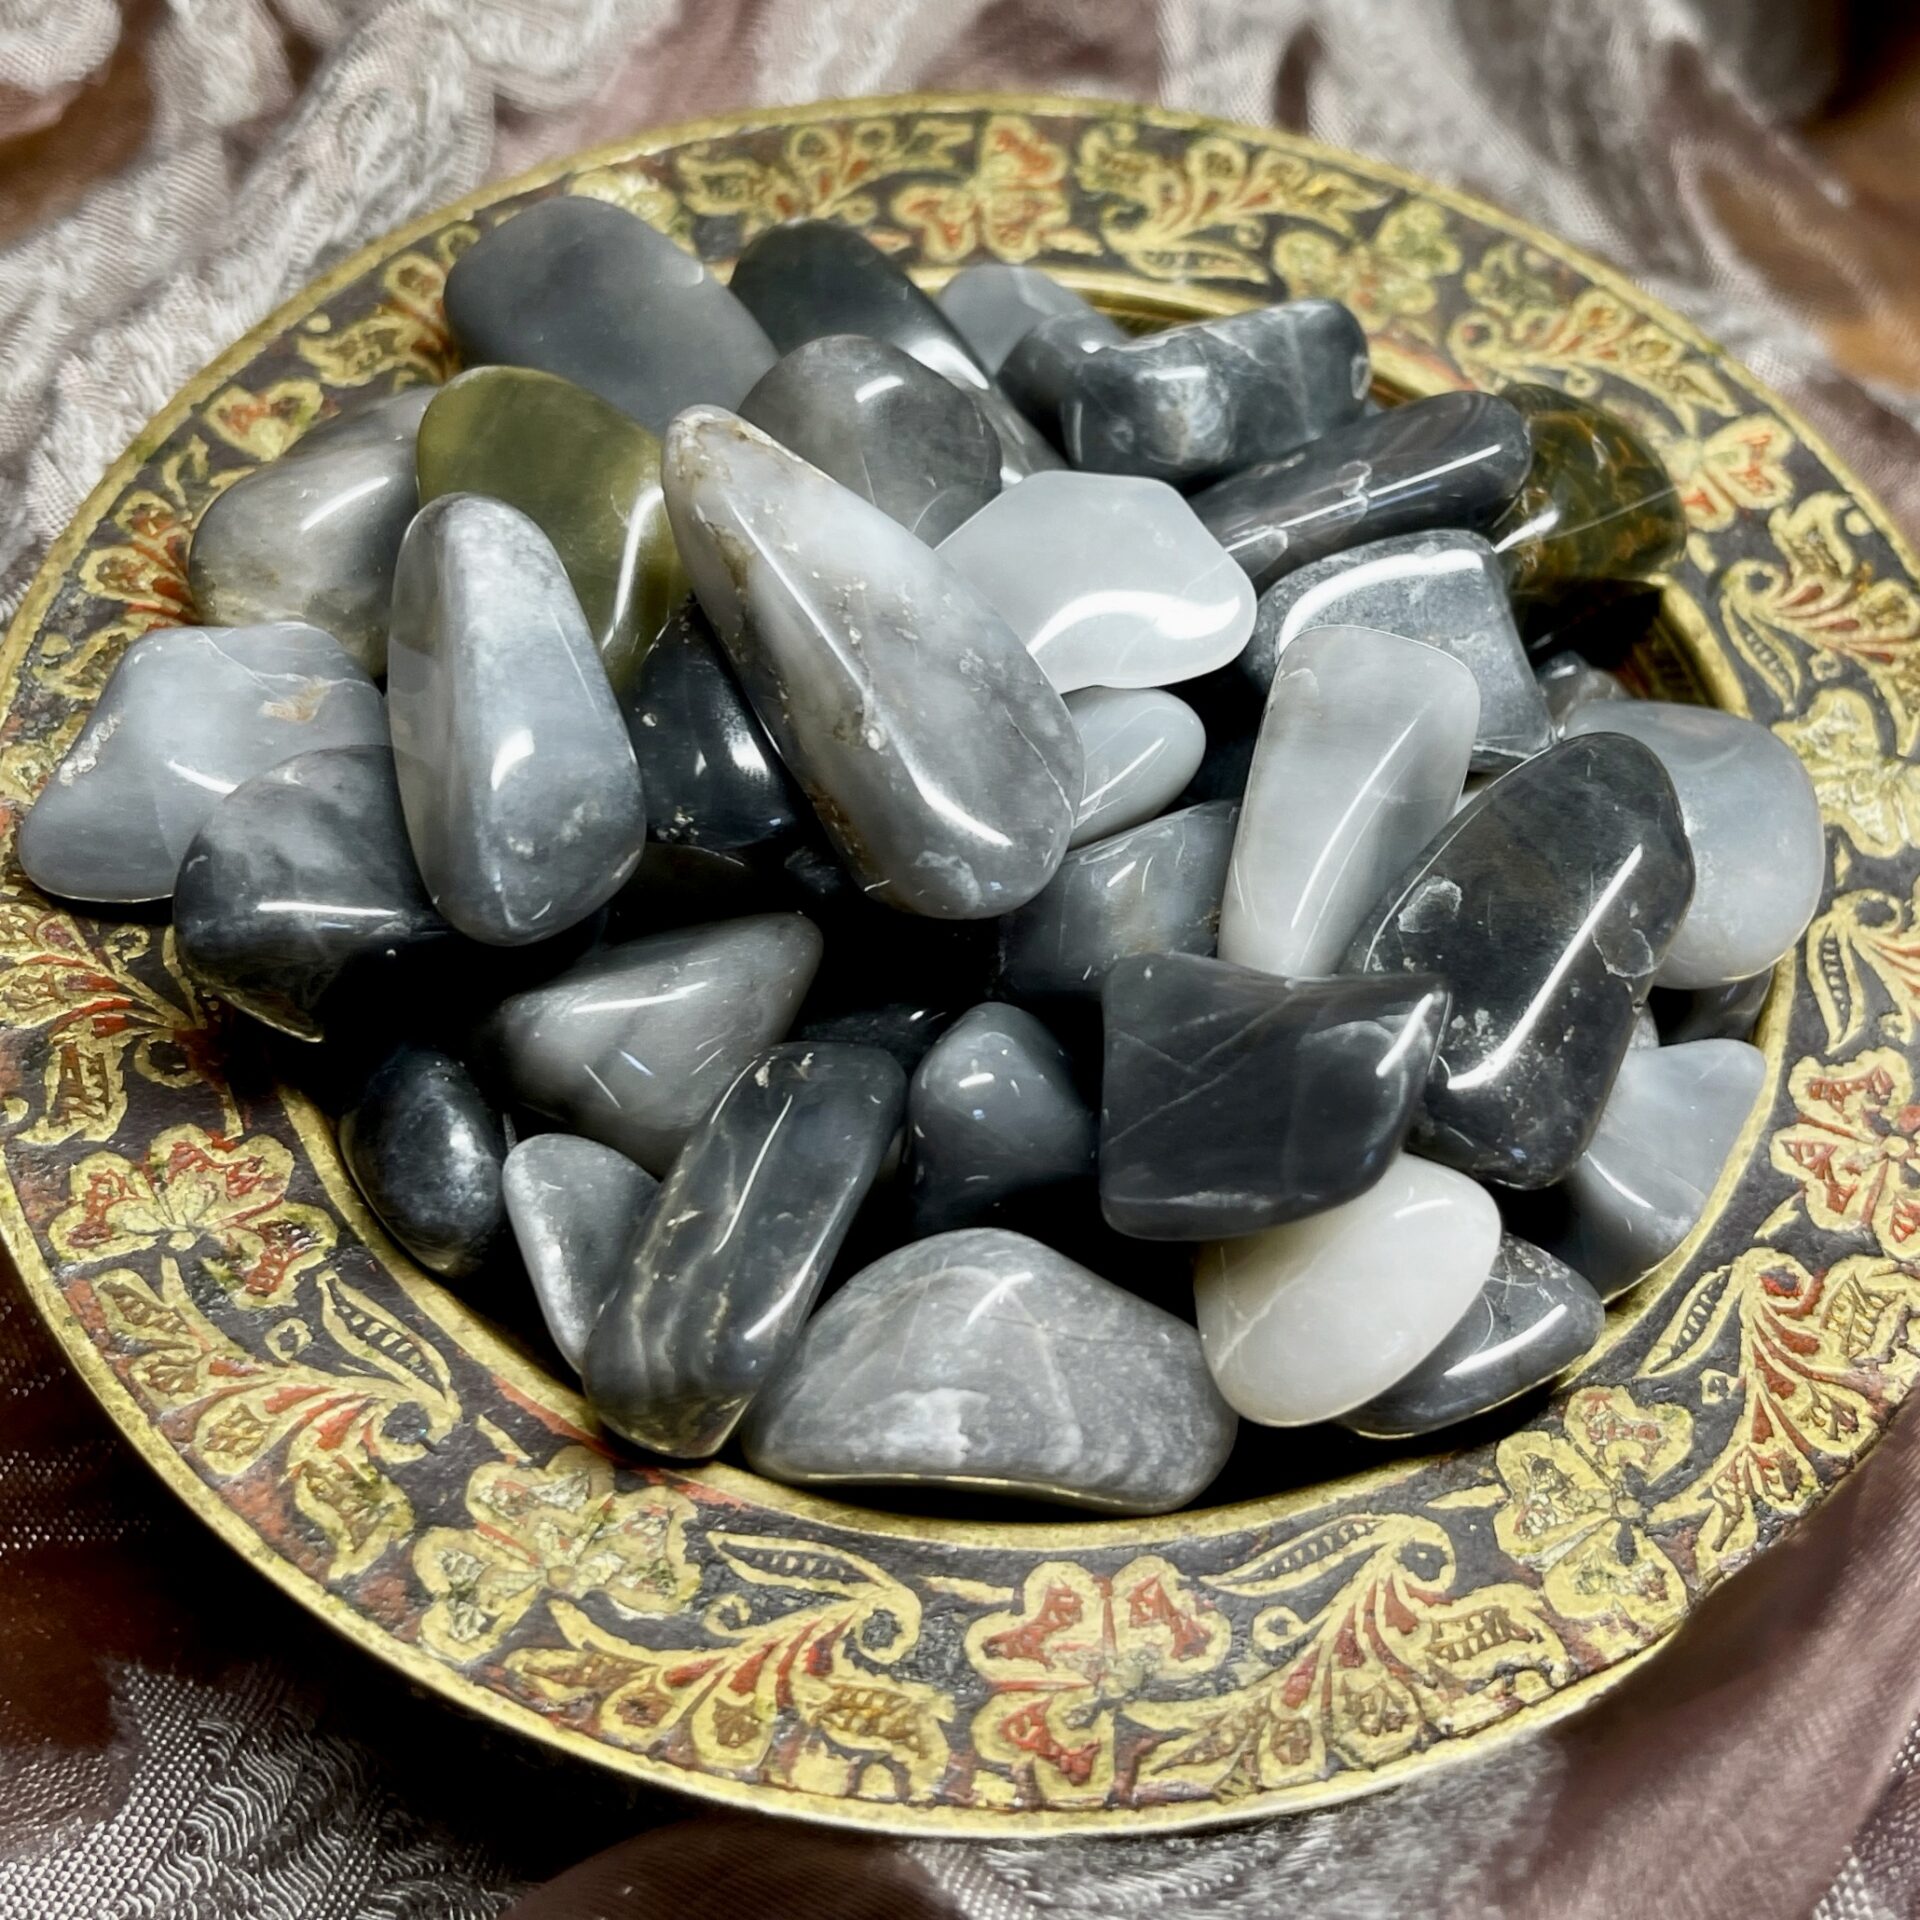 Ethically Sourced 1 VATICAN STONE 1 Inch Tumbled Stone 